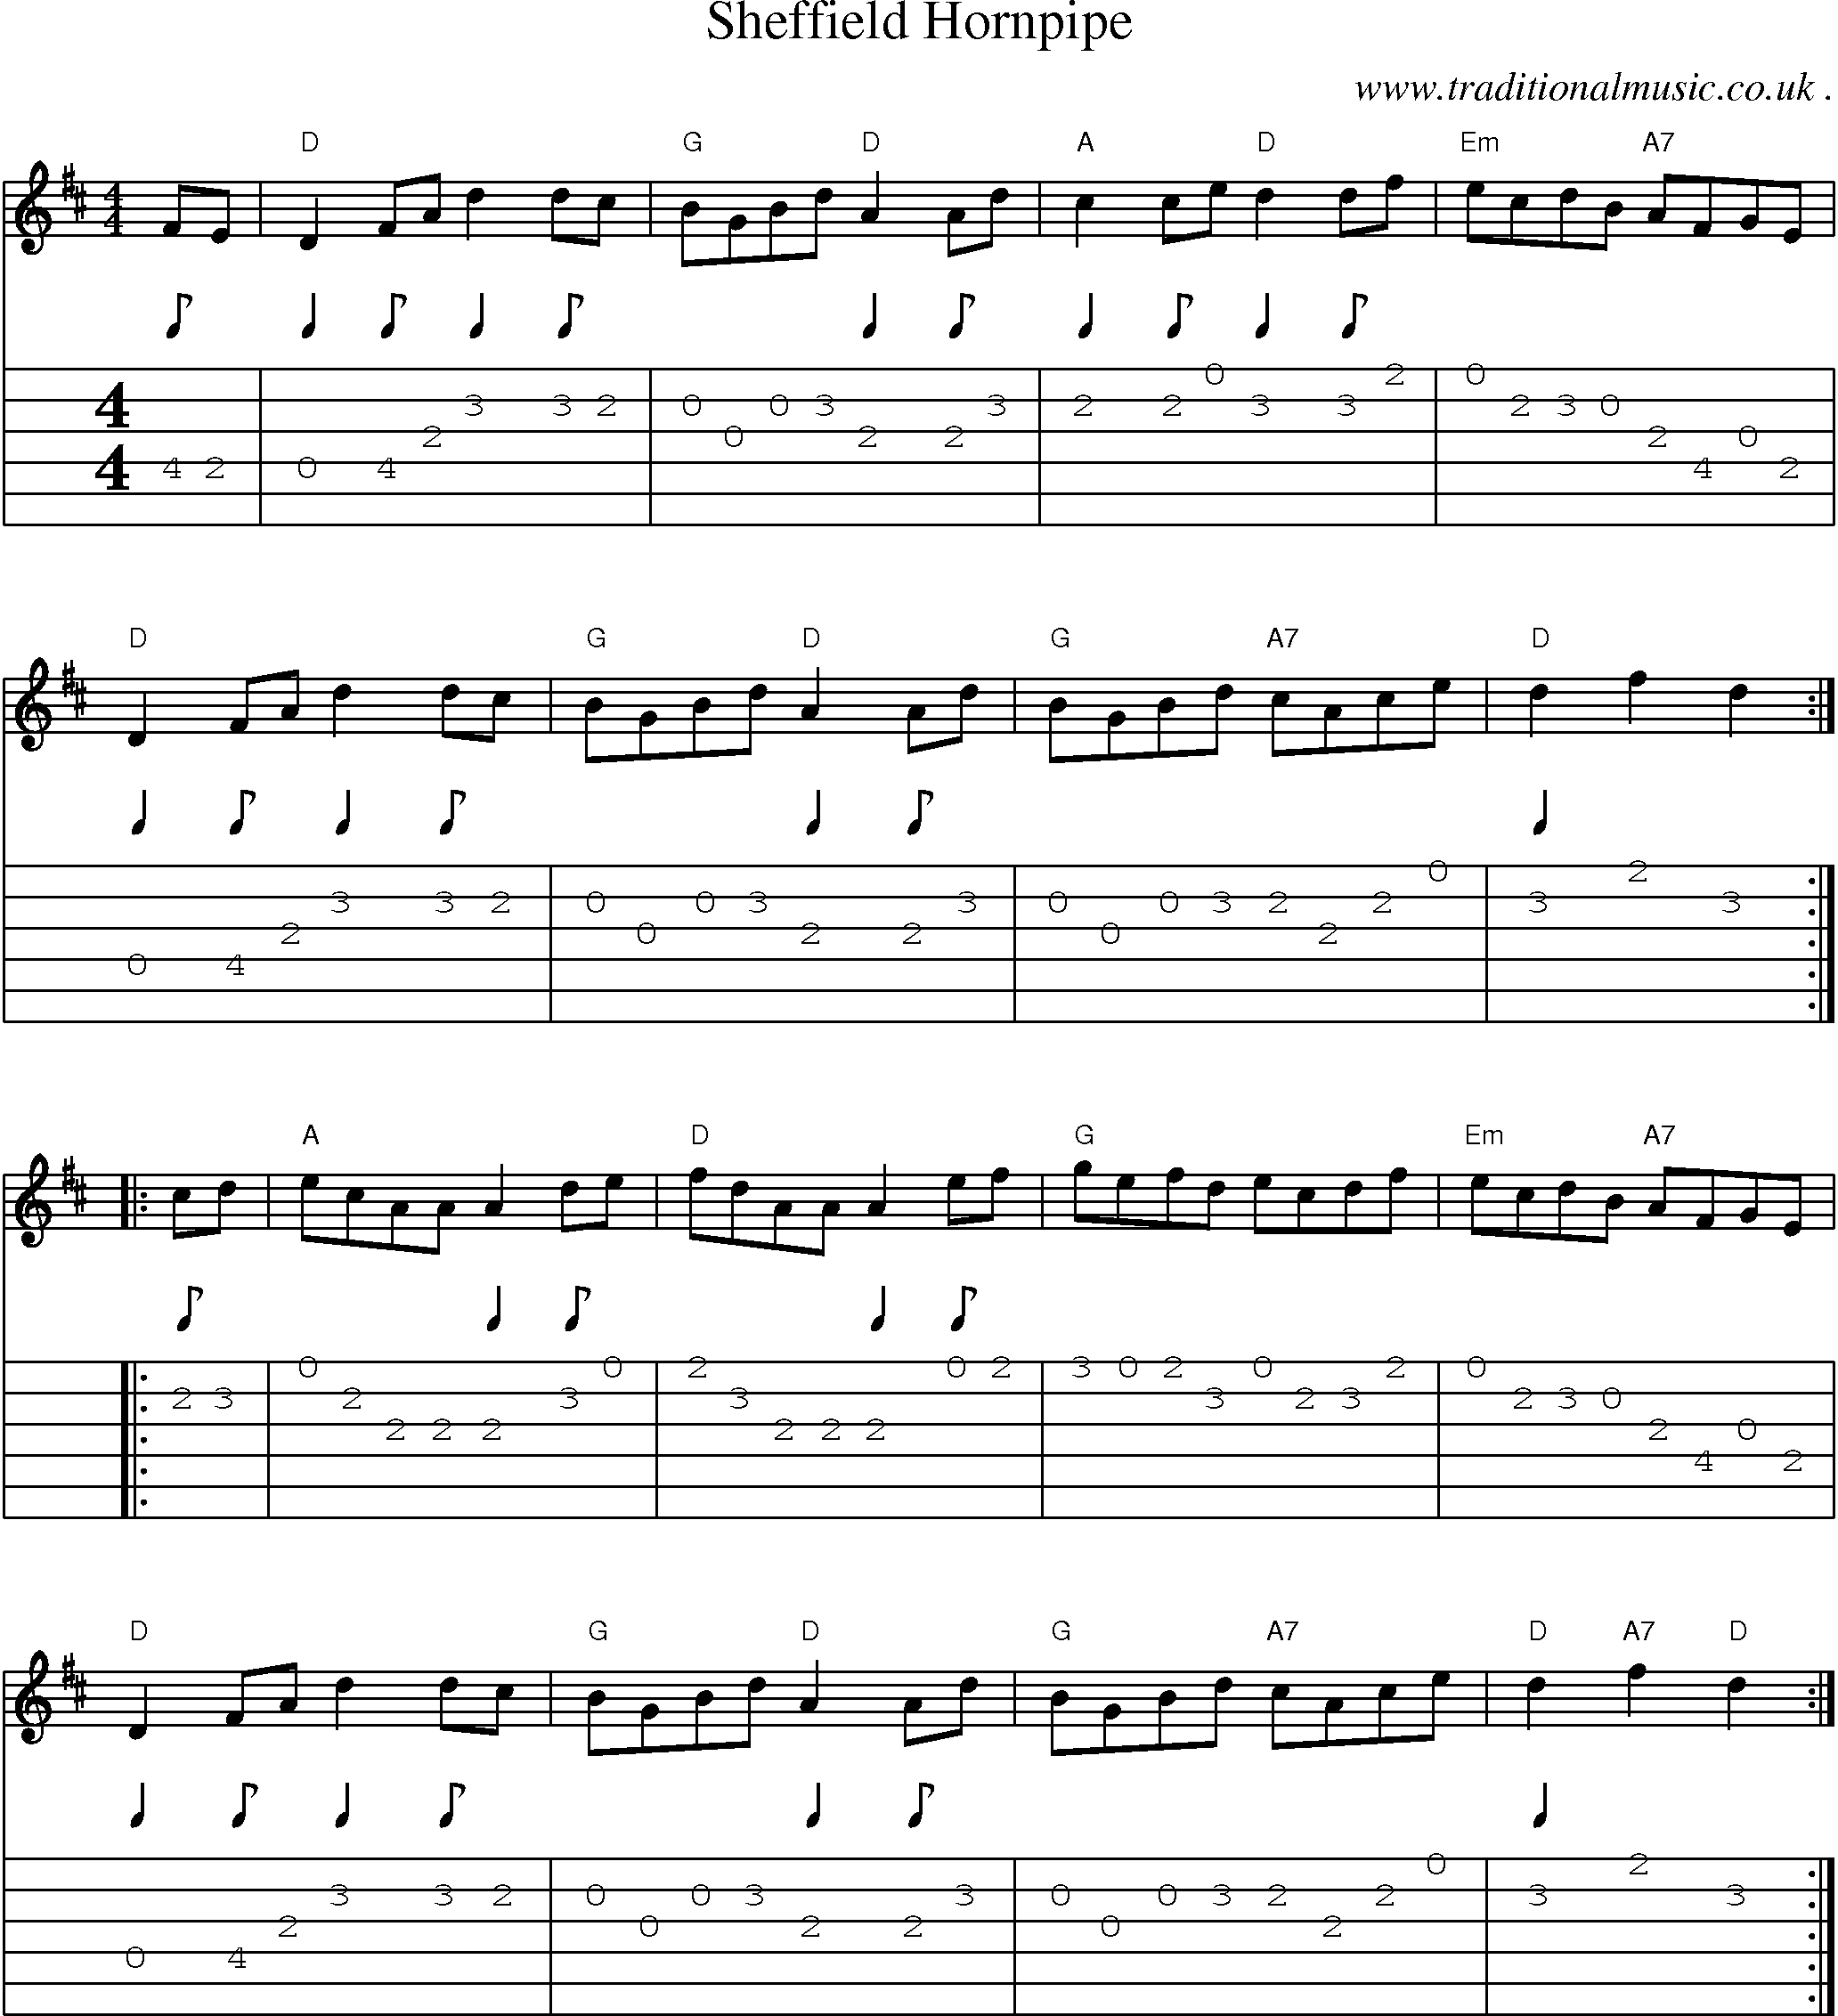 Music Score and Guitar Tabs for Sheffield Hornpipe